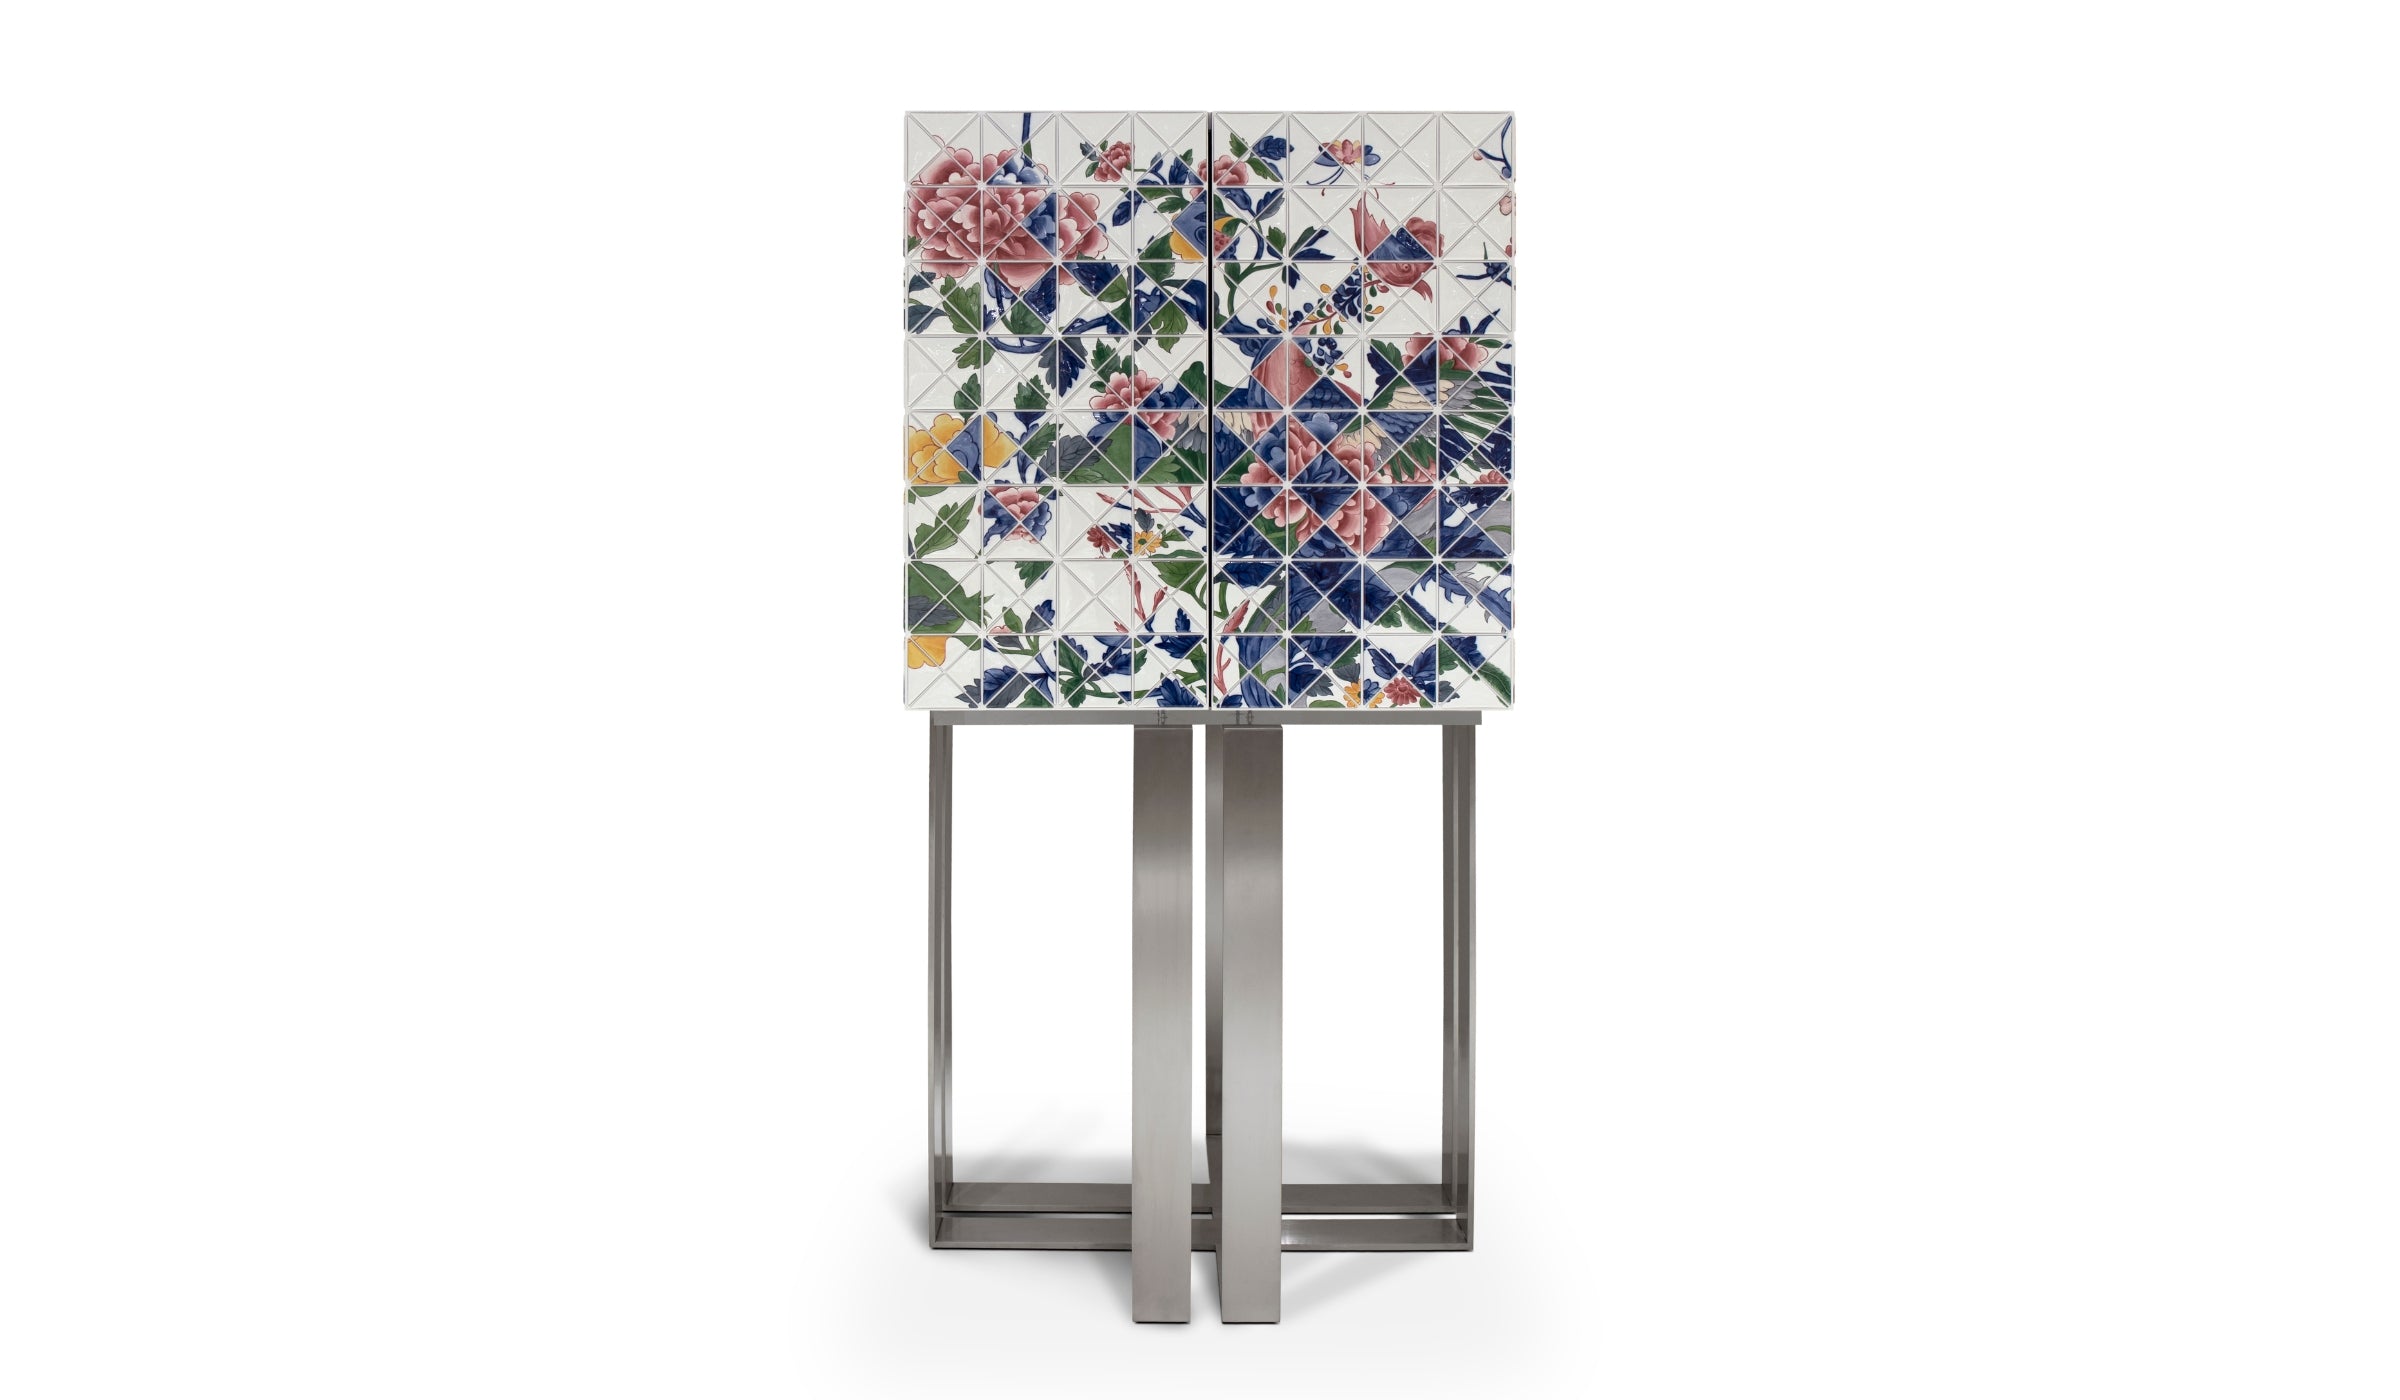 Pixel Il Était Une Fois - Floral cabinet in ceramic and brushed steel